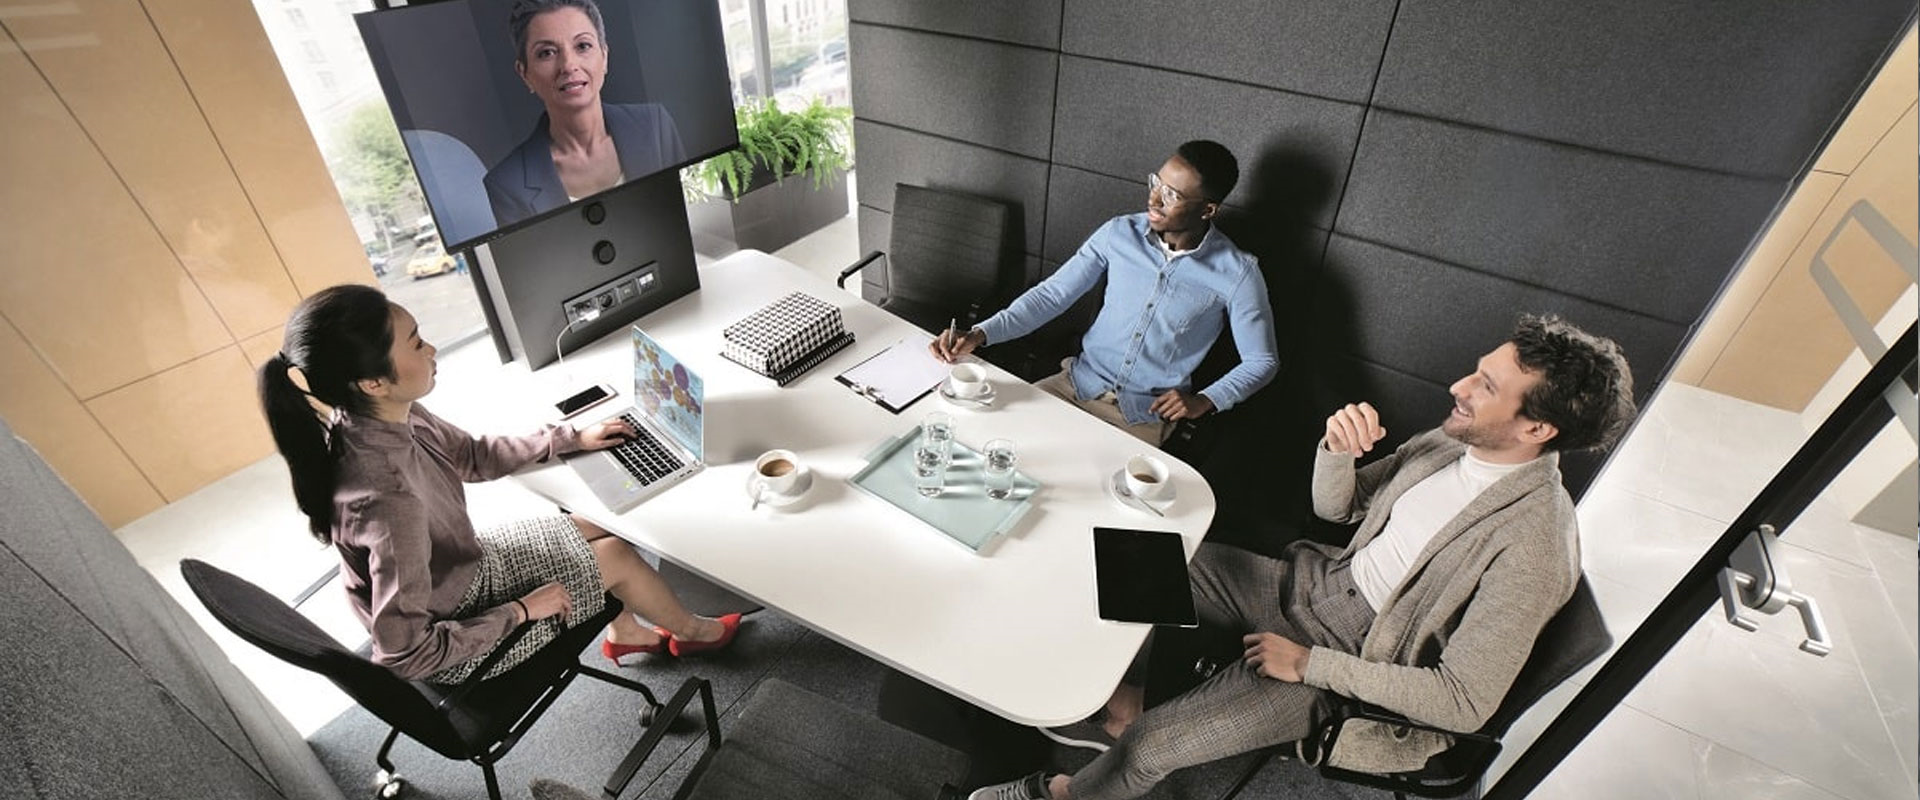 An image showing a group of people inside an office pod, demonstrating how to use office pods for brainstorming sessions